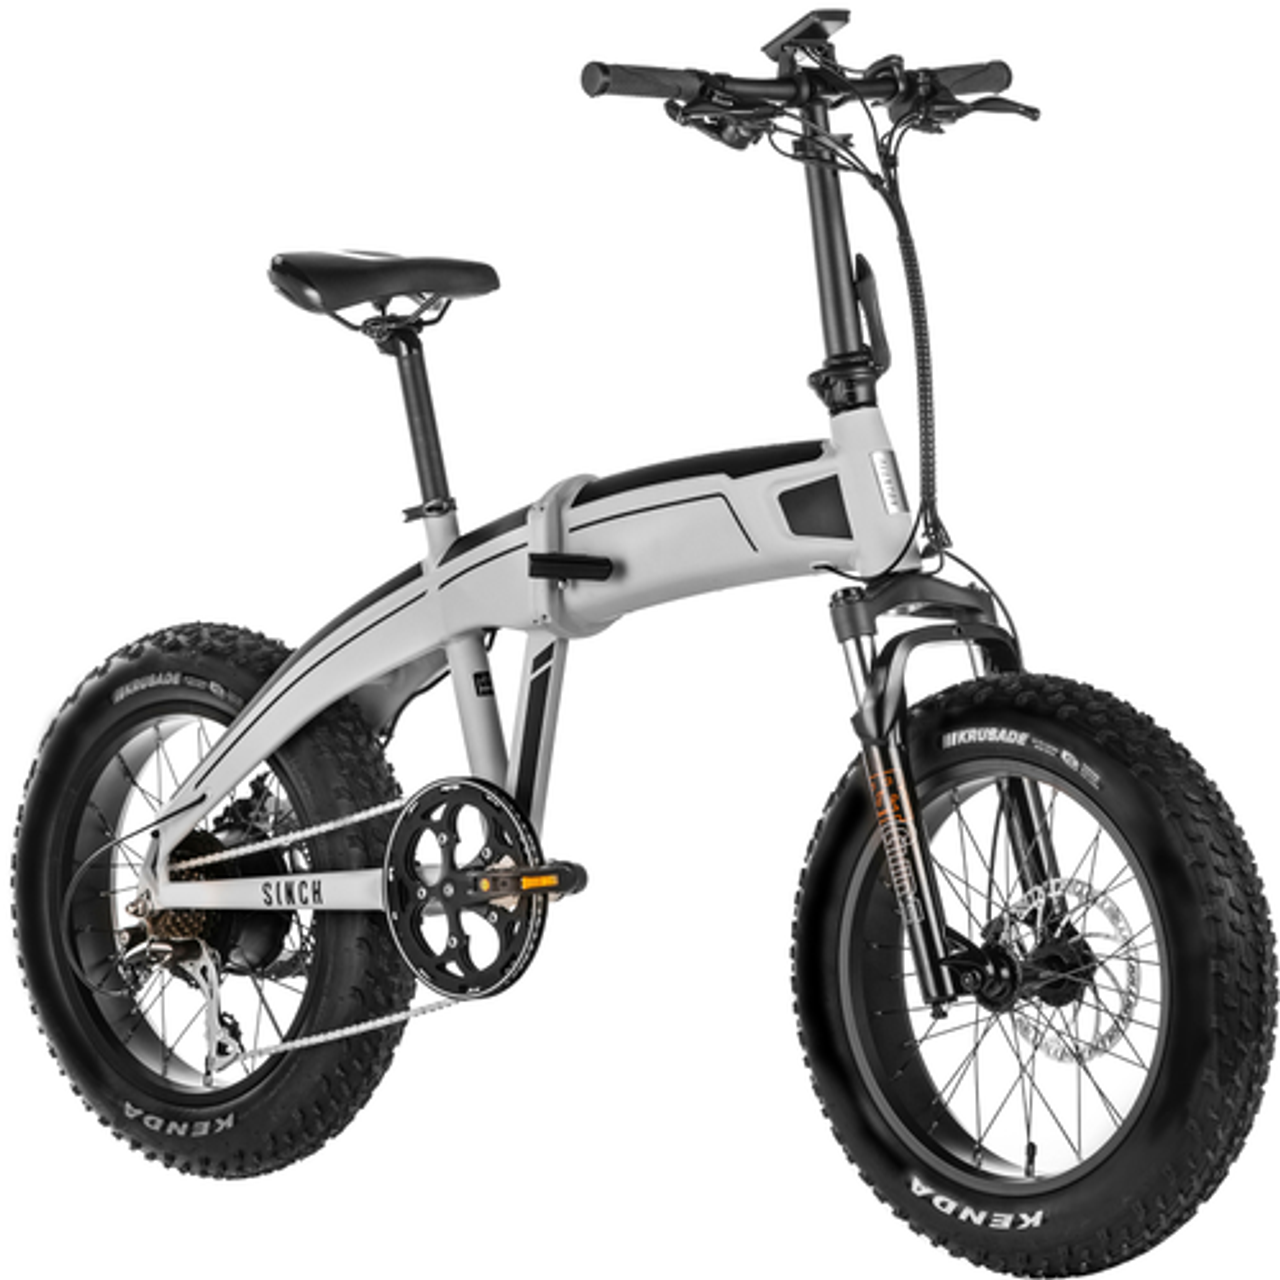 Aventon - Sinch Foldable Ebike w/ 40 mile Max Operating Range and 20 MPH Max Speed - Cloud Grey